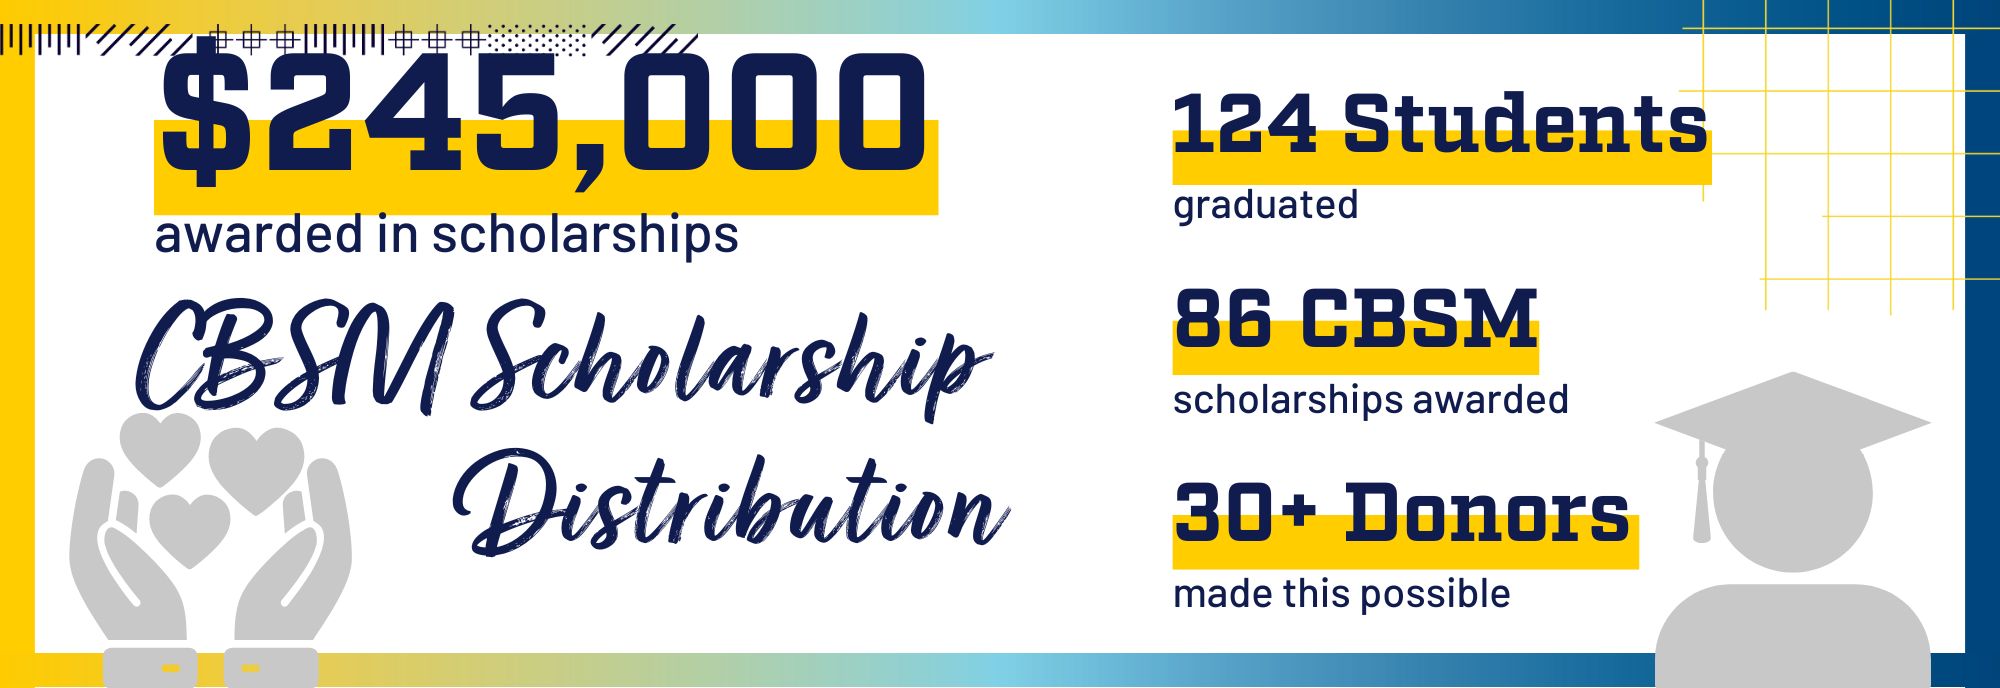 CBSM Scholarship Distribution: $265,000 awarded in scholarships, 124 students graduated, 86 CBSM scholarships awards, and over 30 donors made this possible. 